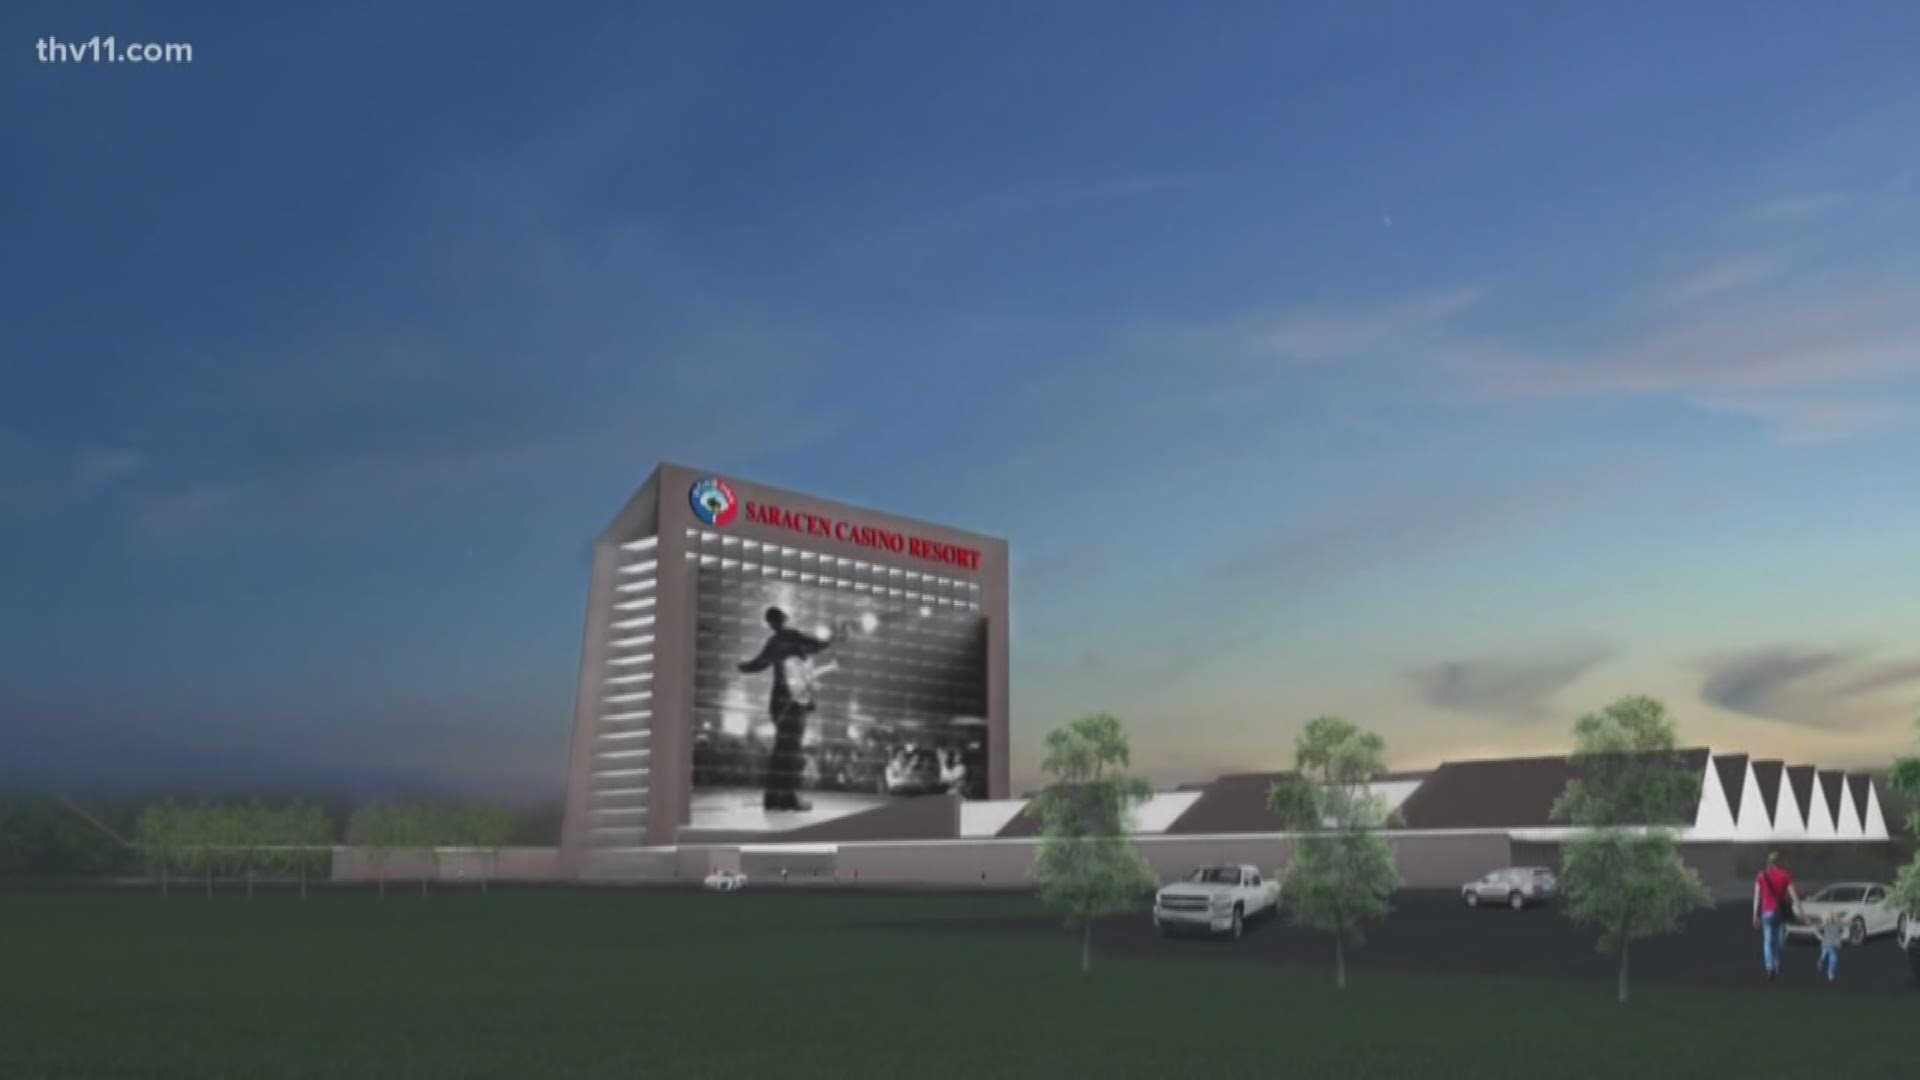 The debate over whether to allow smoking in the new casino coming to Arkansas is not going away.